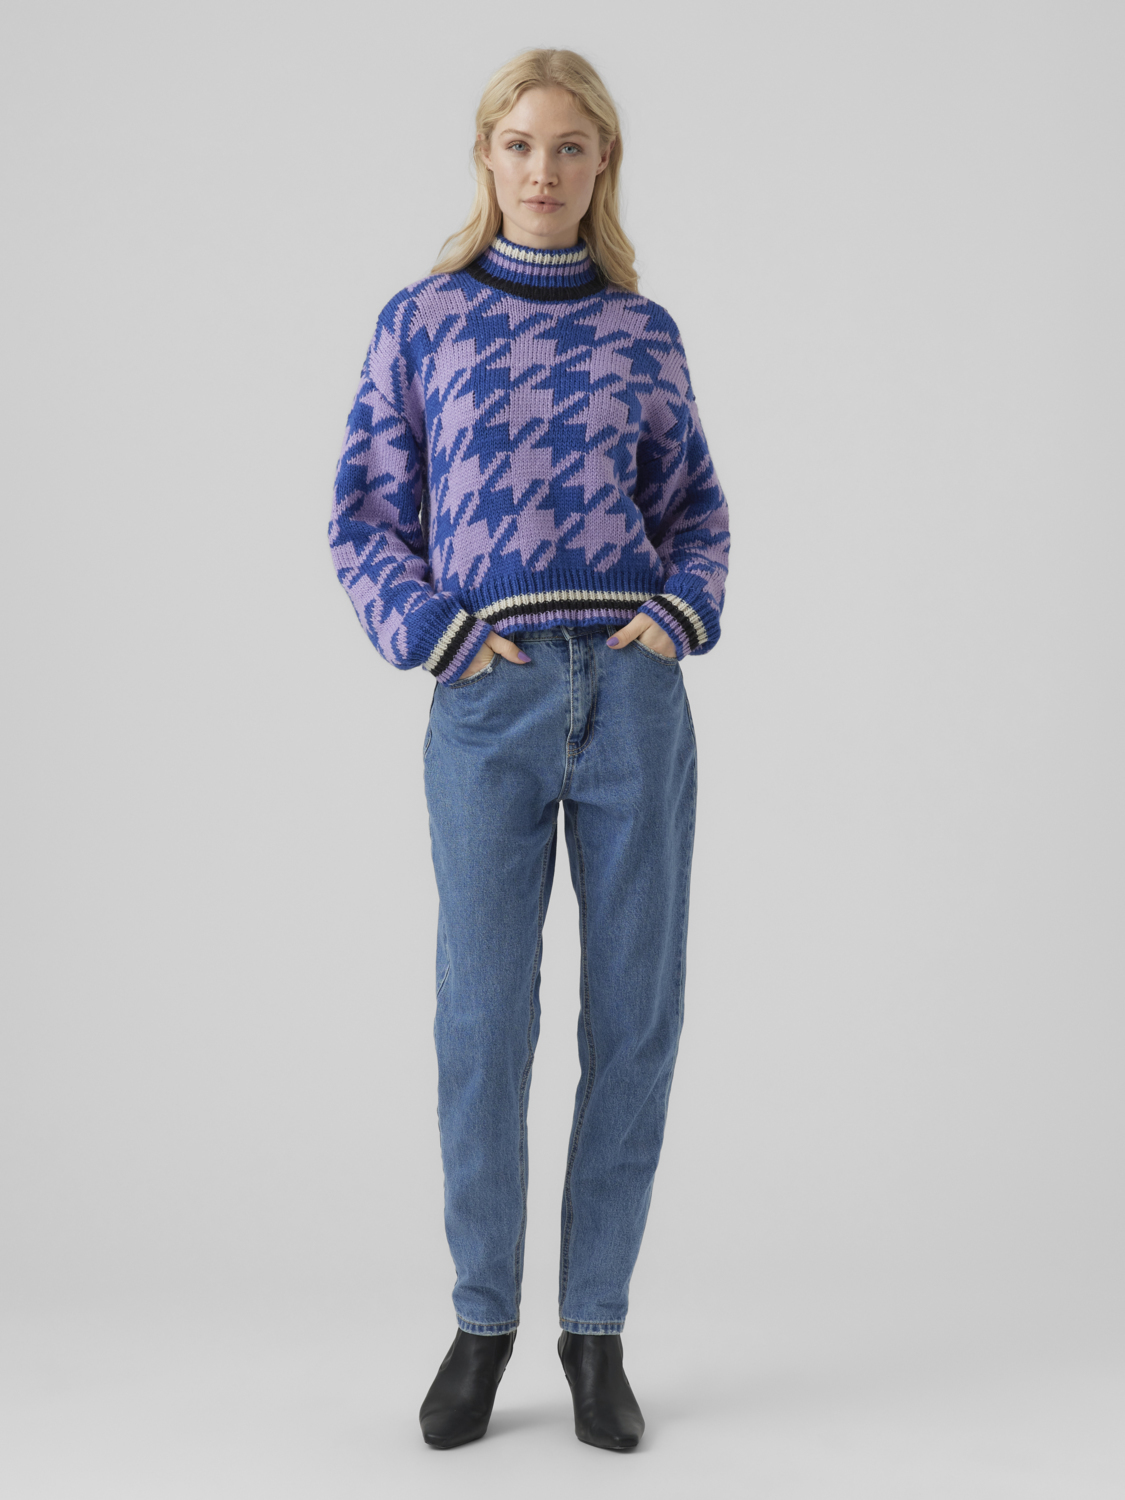 FINAL SALE- Alecia houndstooth sweater, SODALITE BLUE, large